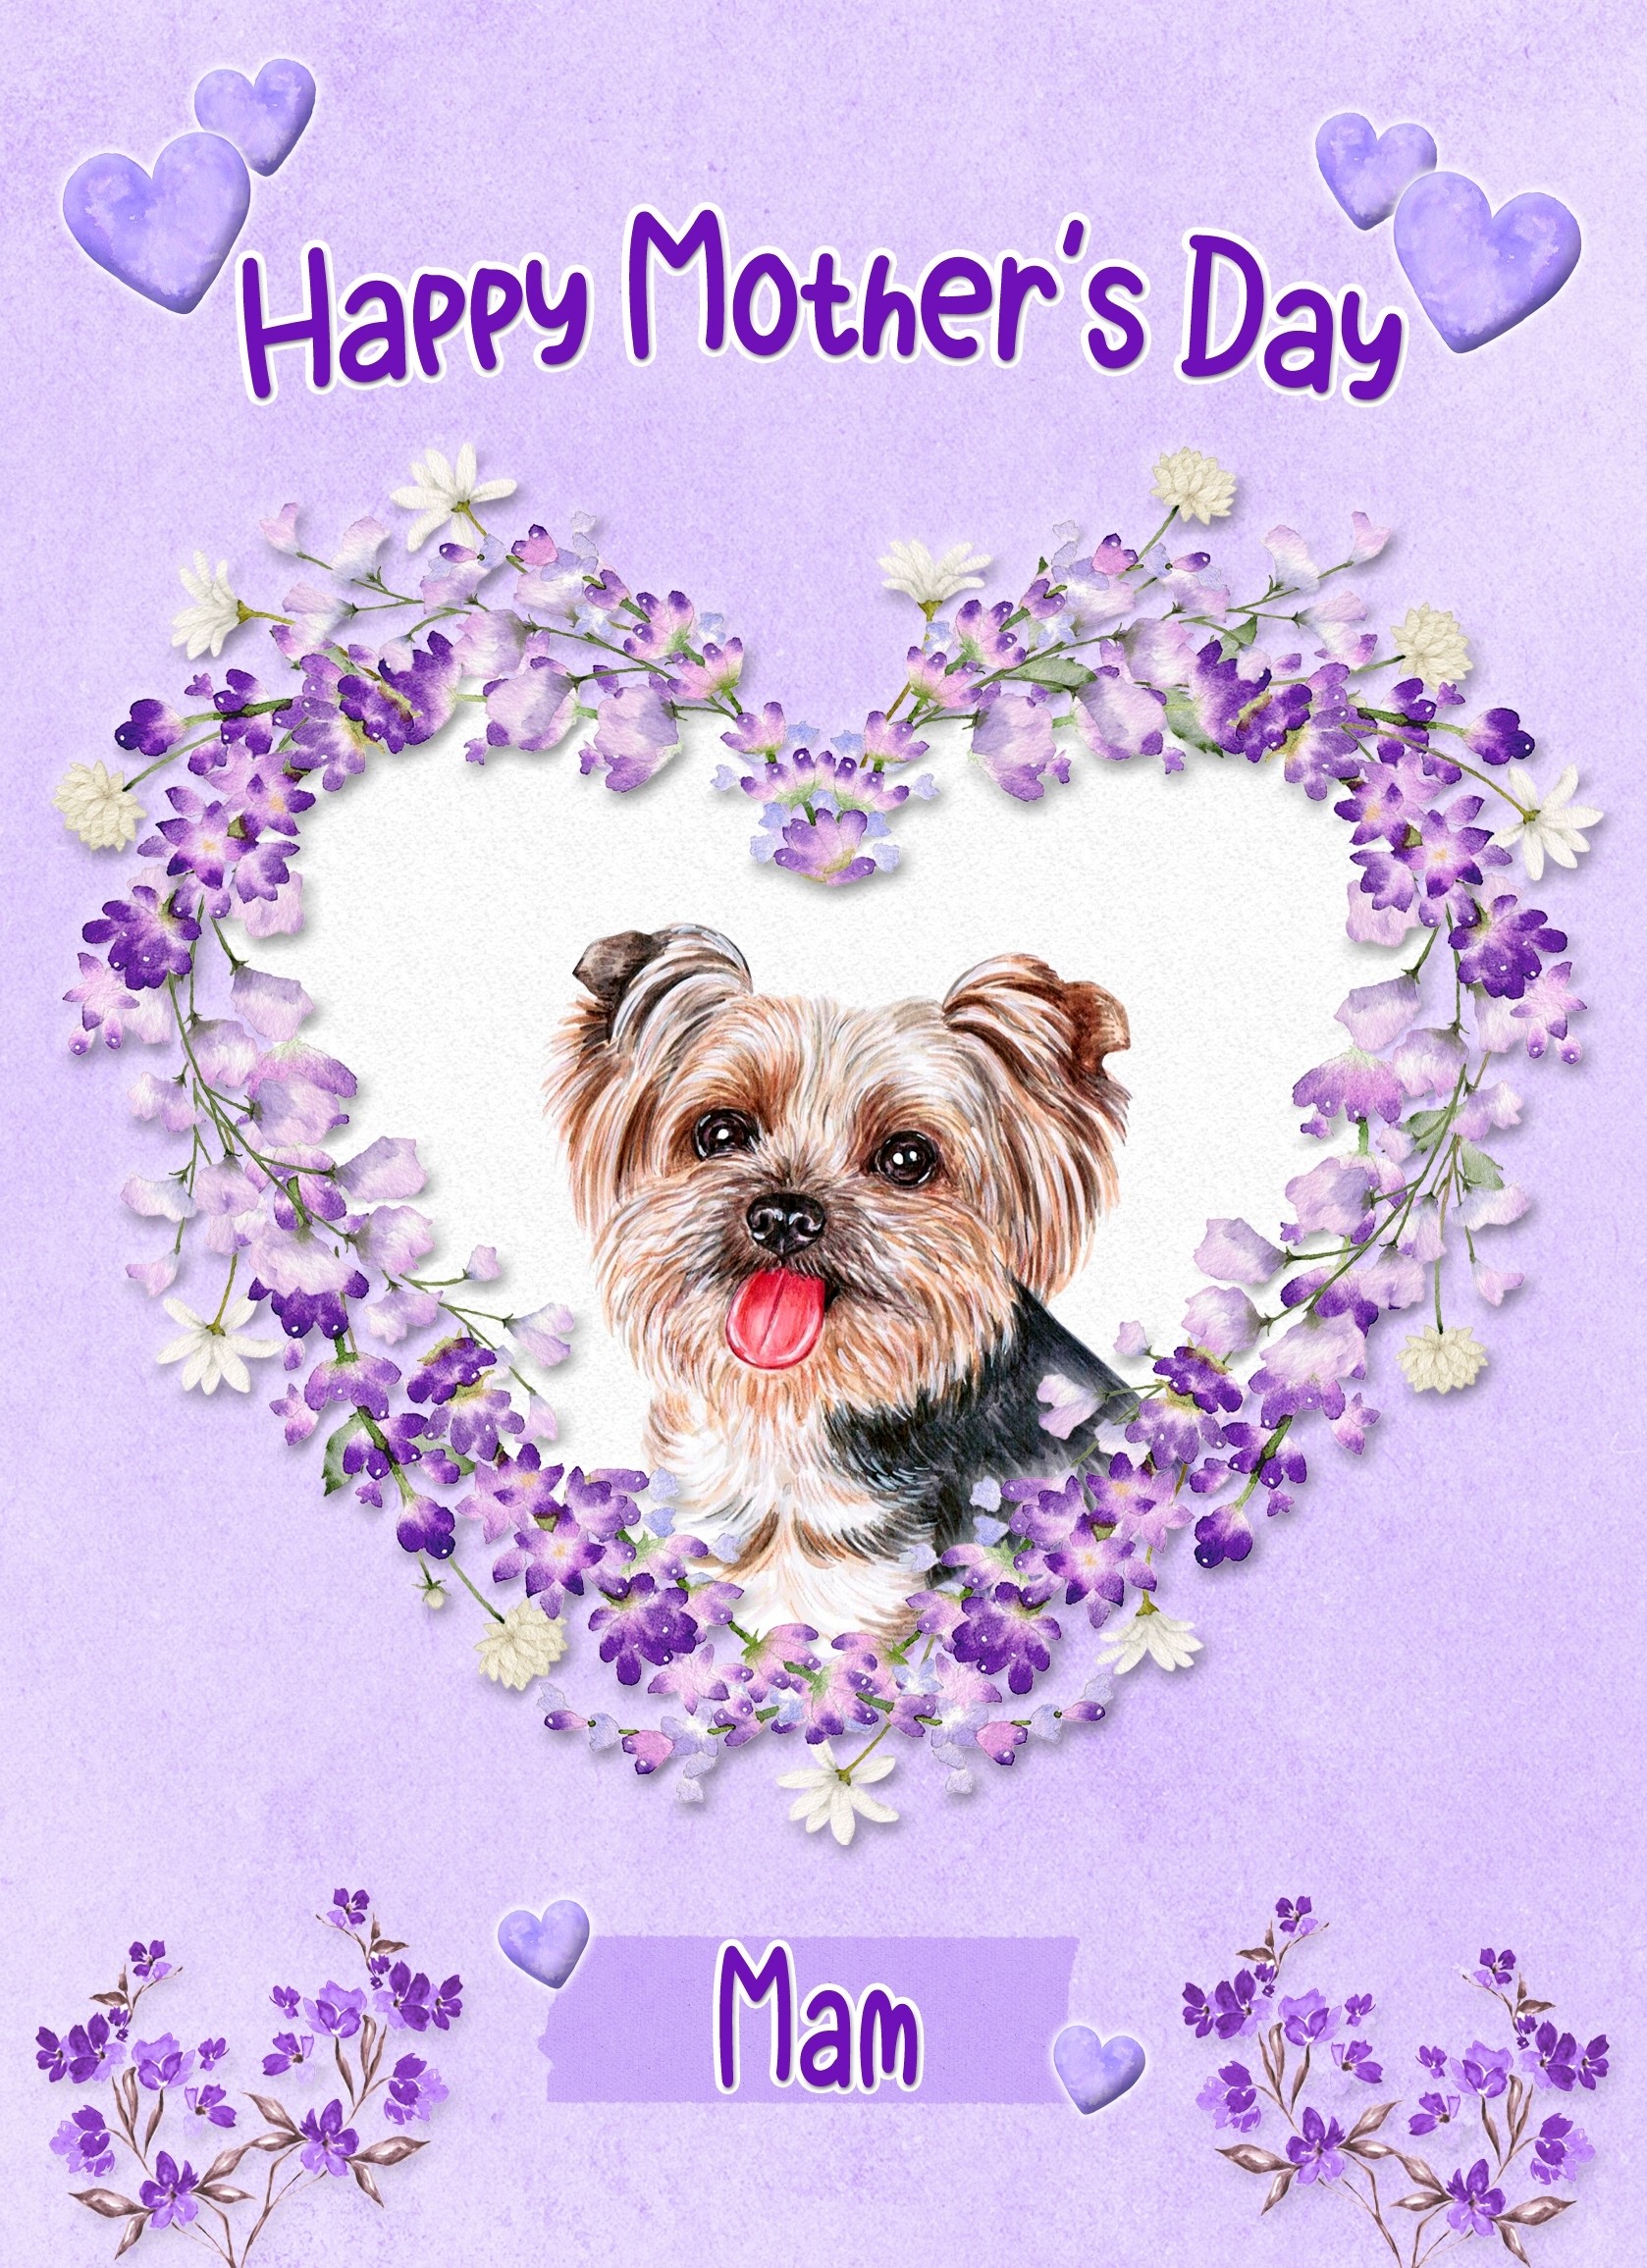 Yorkshire Terrier Dog Mothers Day Card (Happy Mothers, Mam)